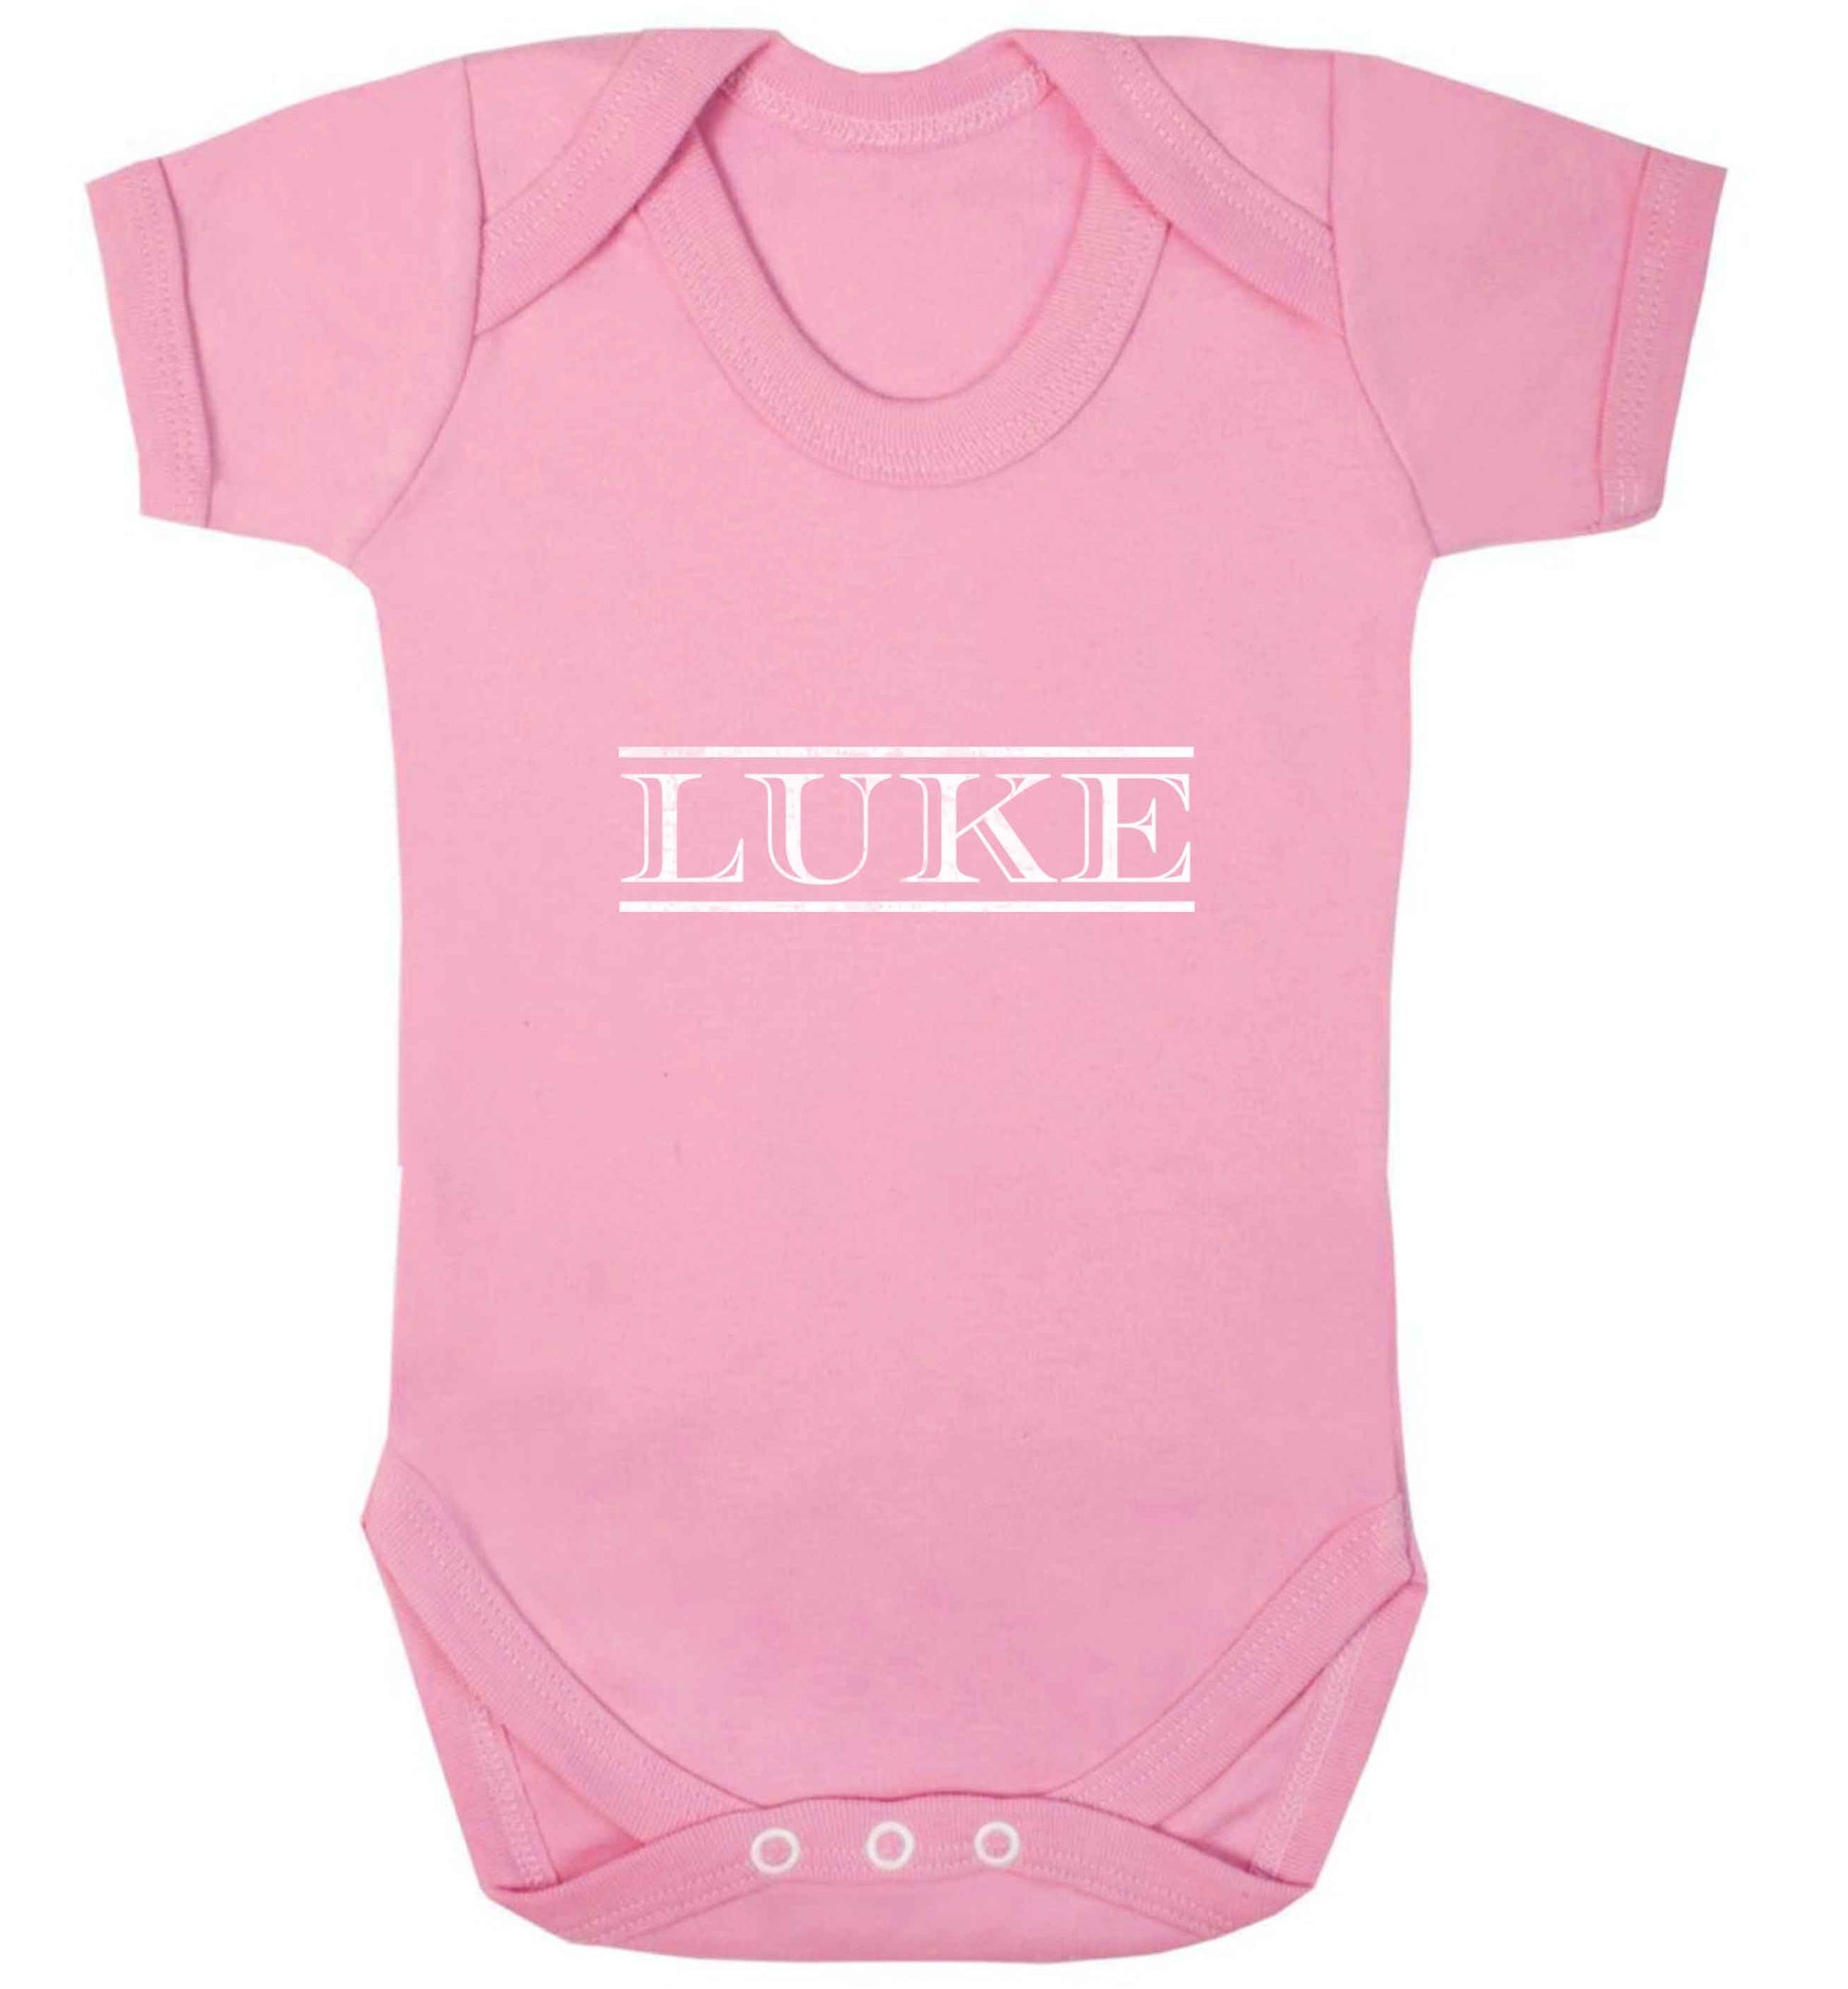 Personalised name baby vest pale pink 18-24 months